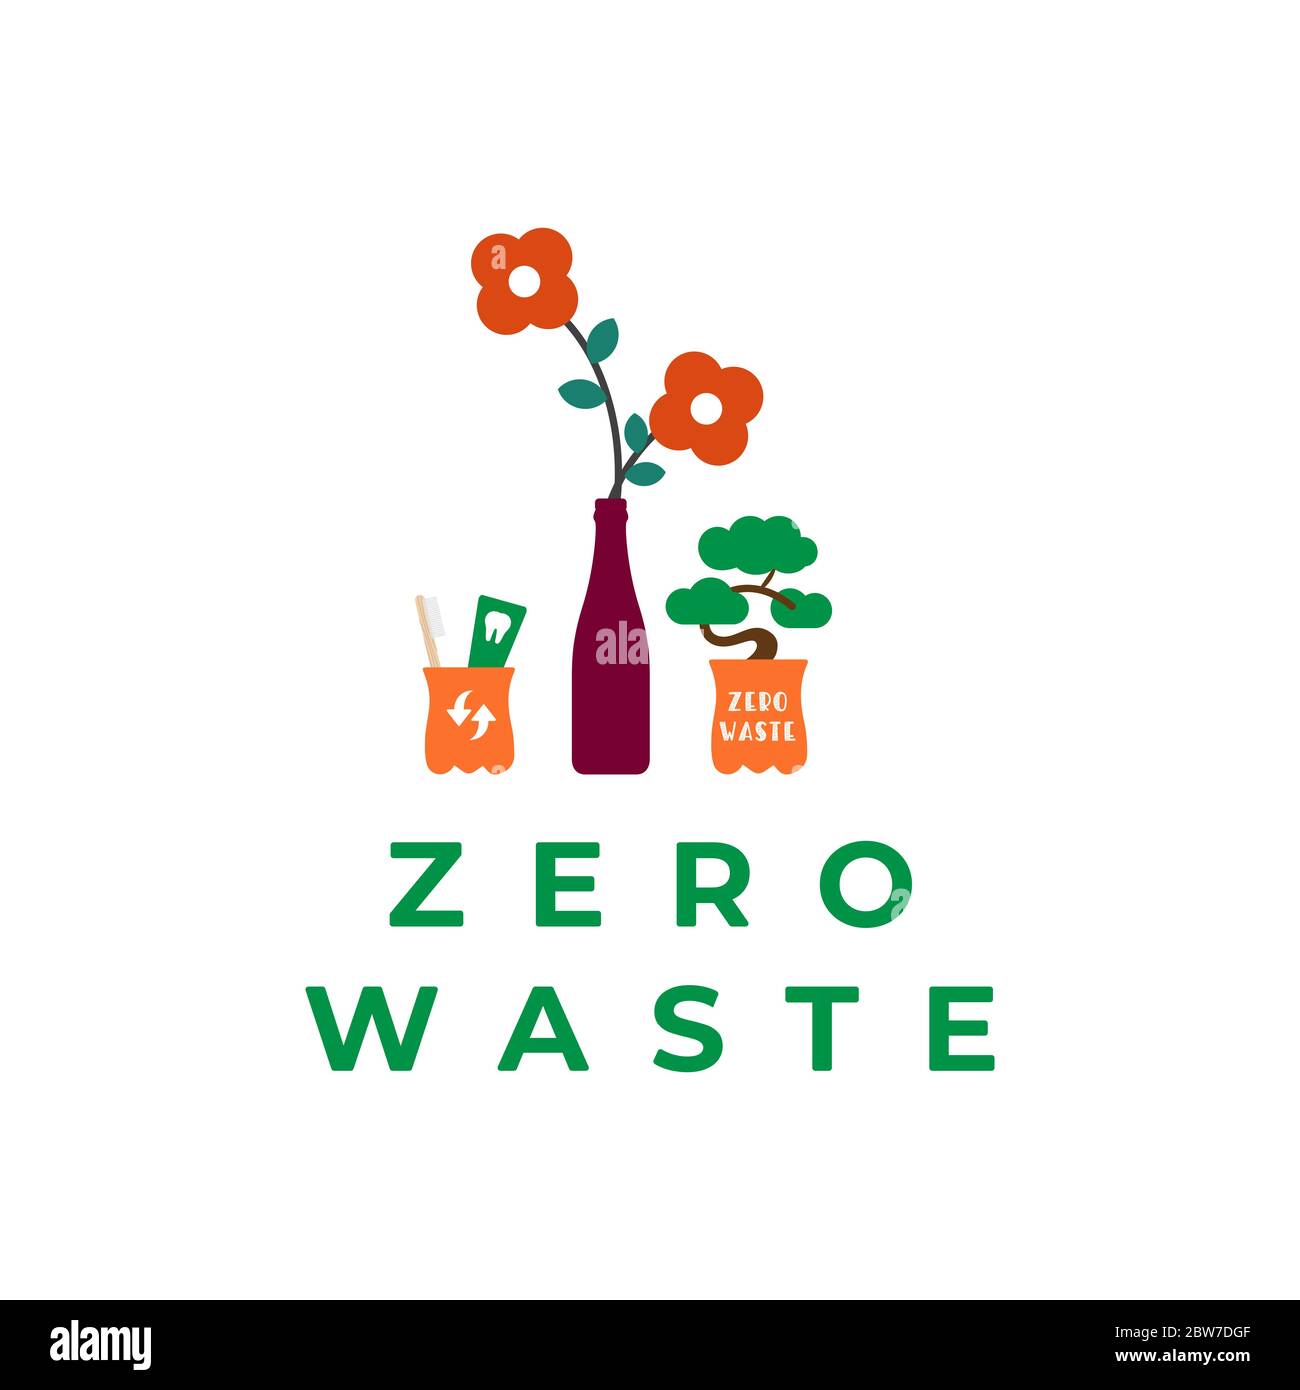 Zero Waste Design Concept for Environment Poster or any design with plastic bottle and bamboo tooth brush illustration Stock Vector